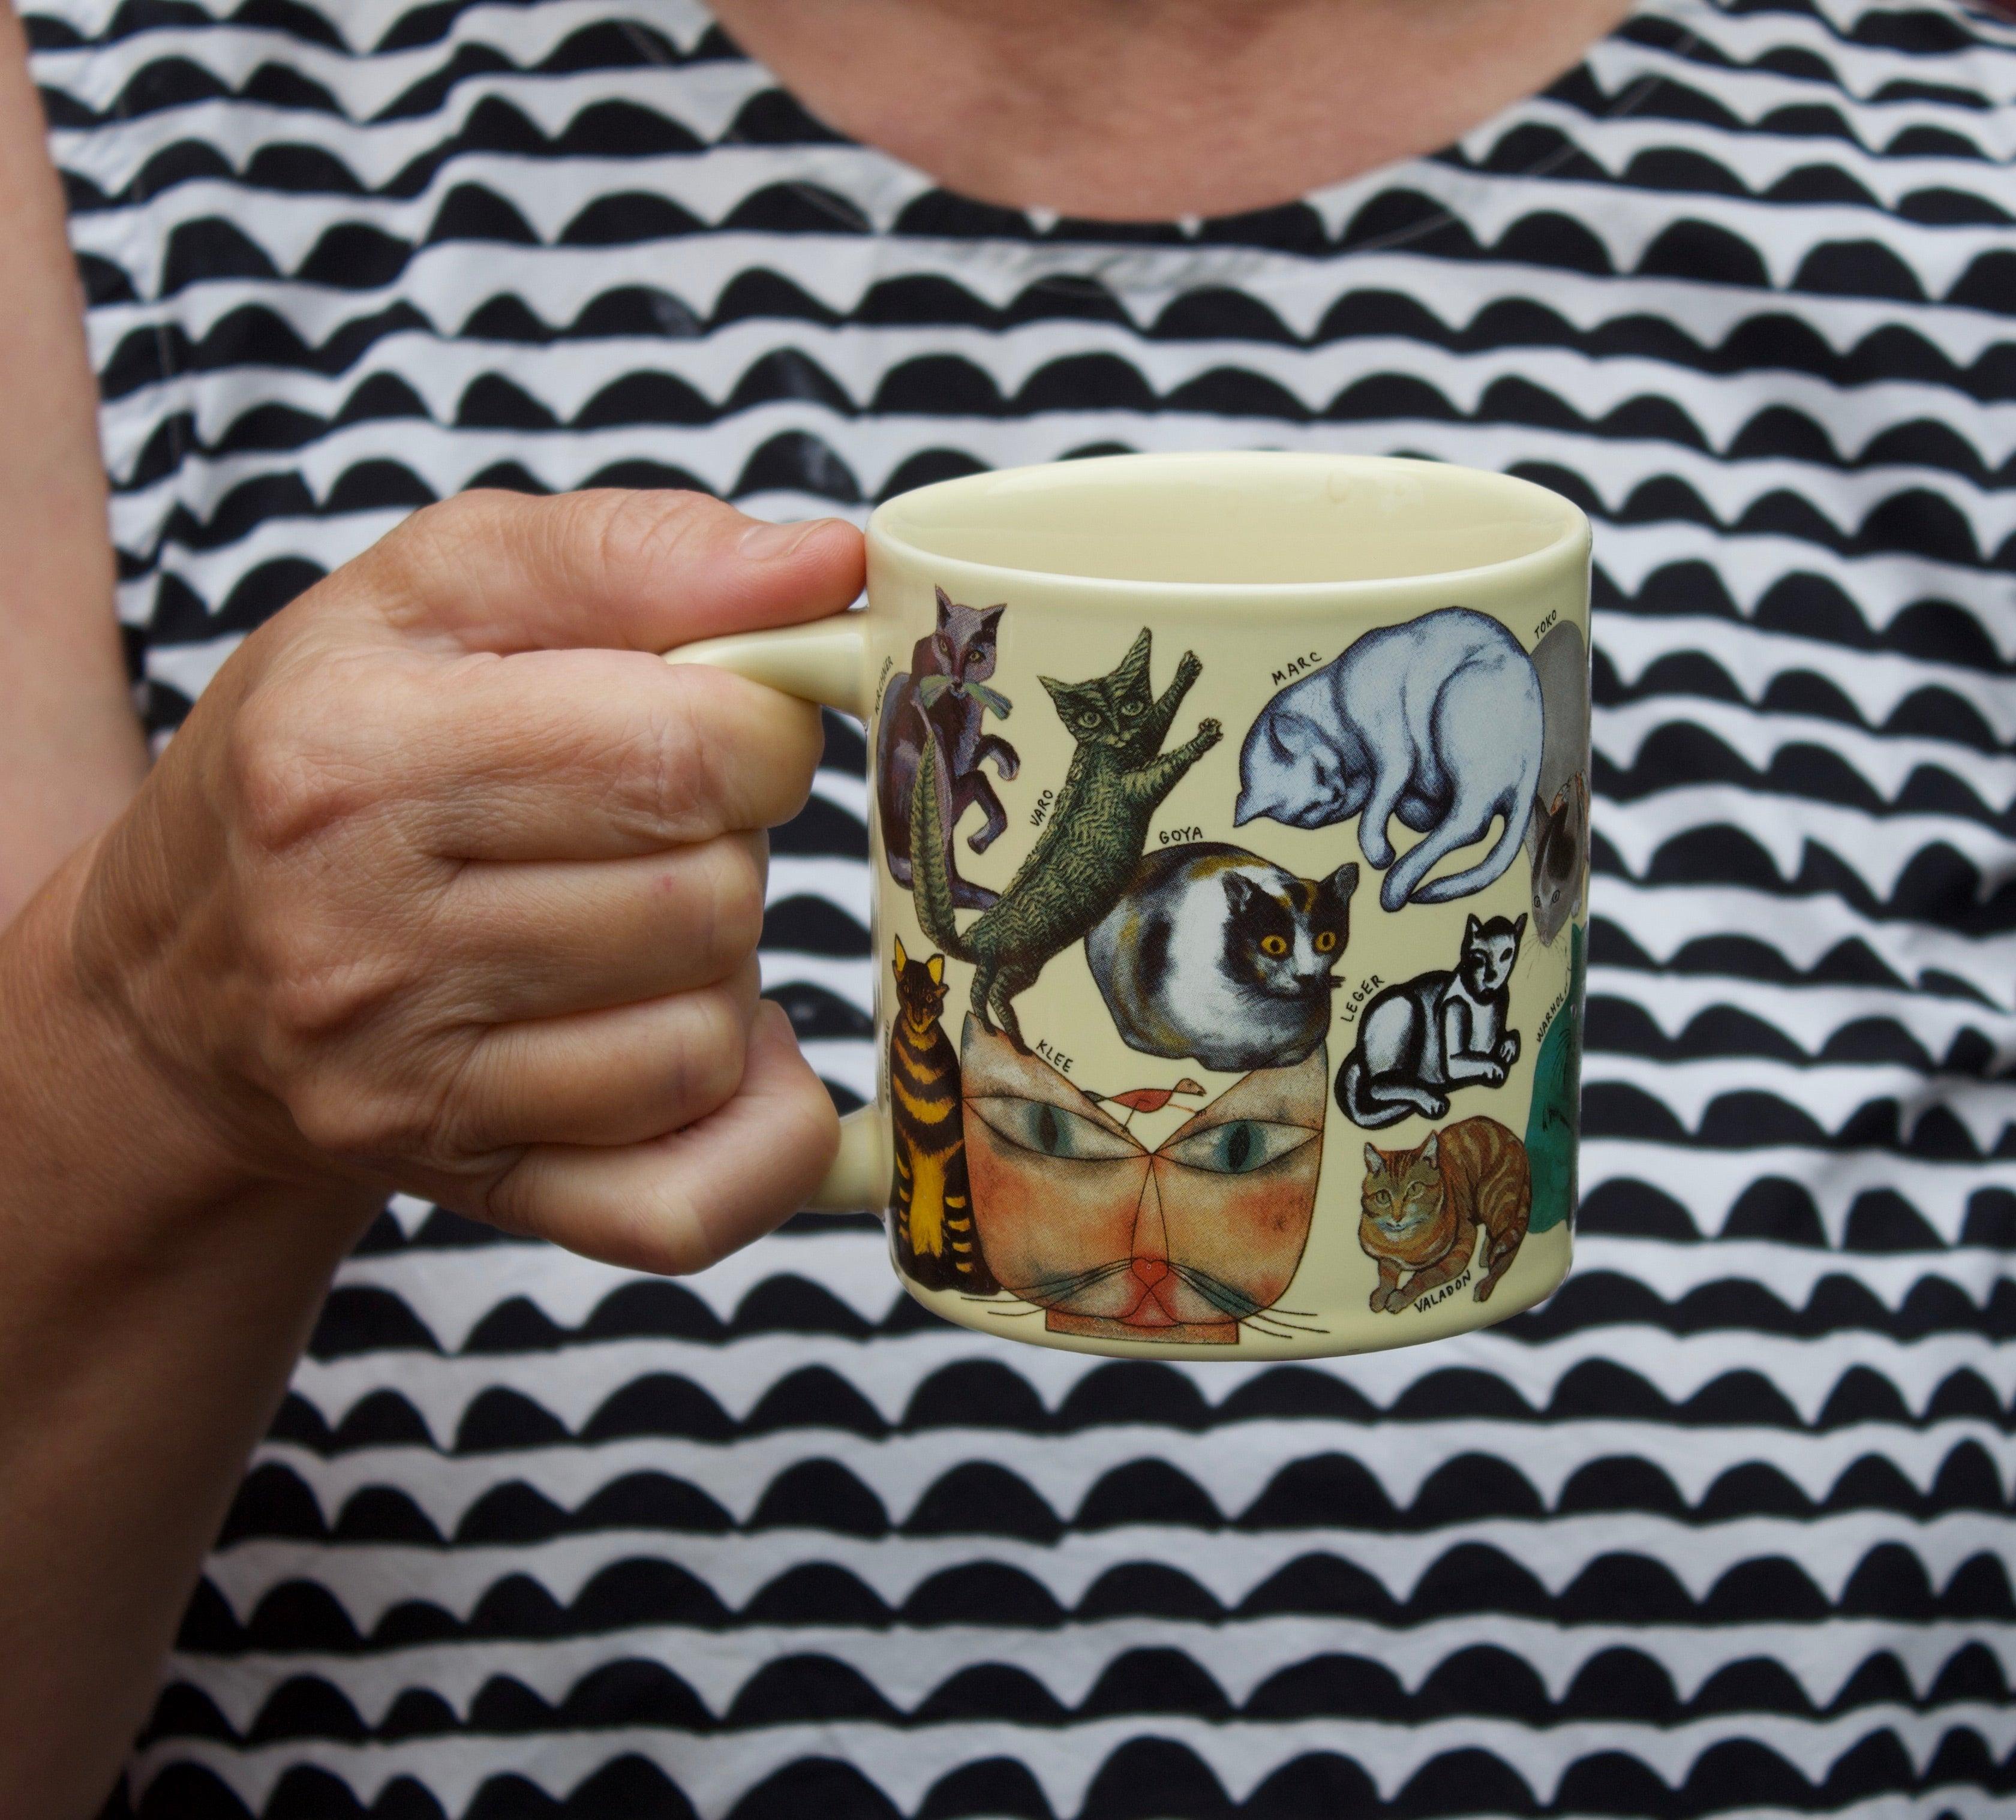 Product photo of Cats of Classical Art Mug, a novelty gift manufactured by The Unemployed Philosophers Guild.